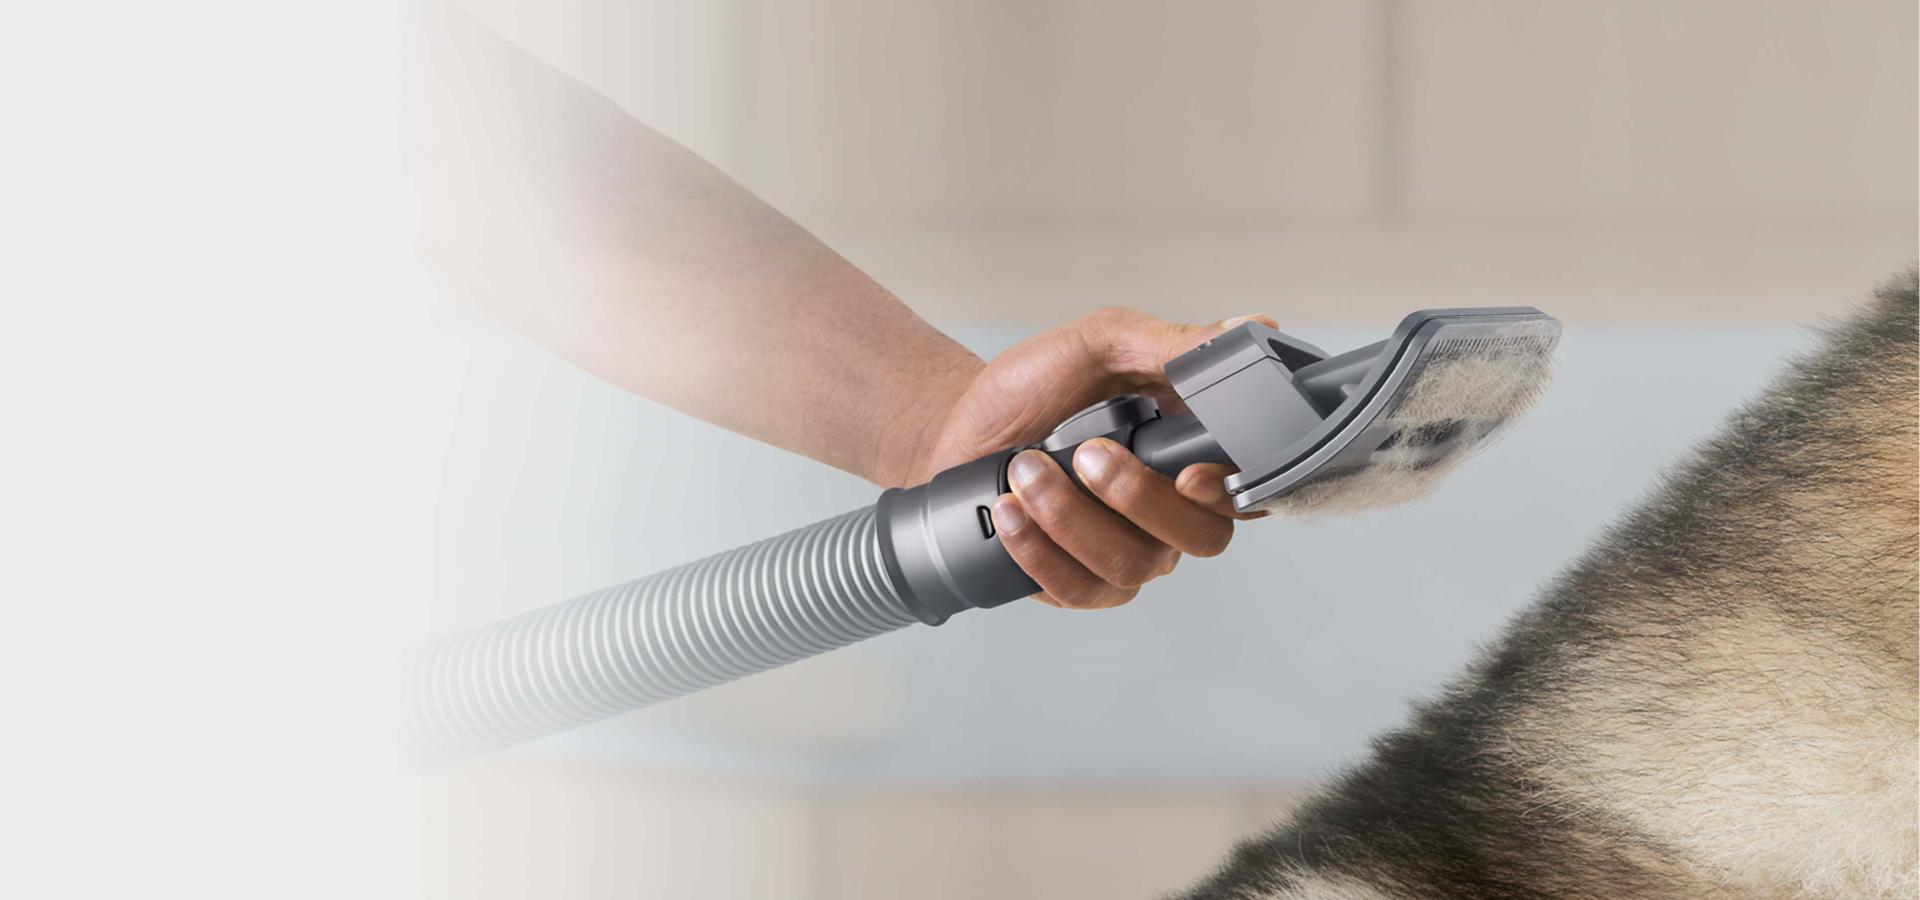 A hand is holding the Pet groom tool, attached to the XL extension hose, next to a long-haired dog. The tool has already captured a significant amount of hair in its bristles. 